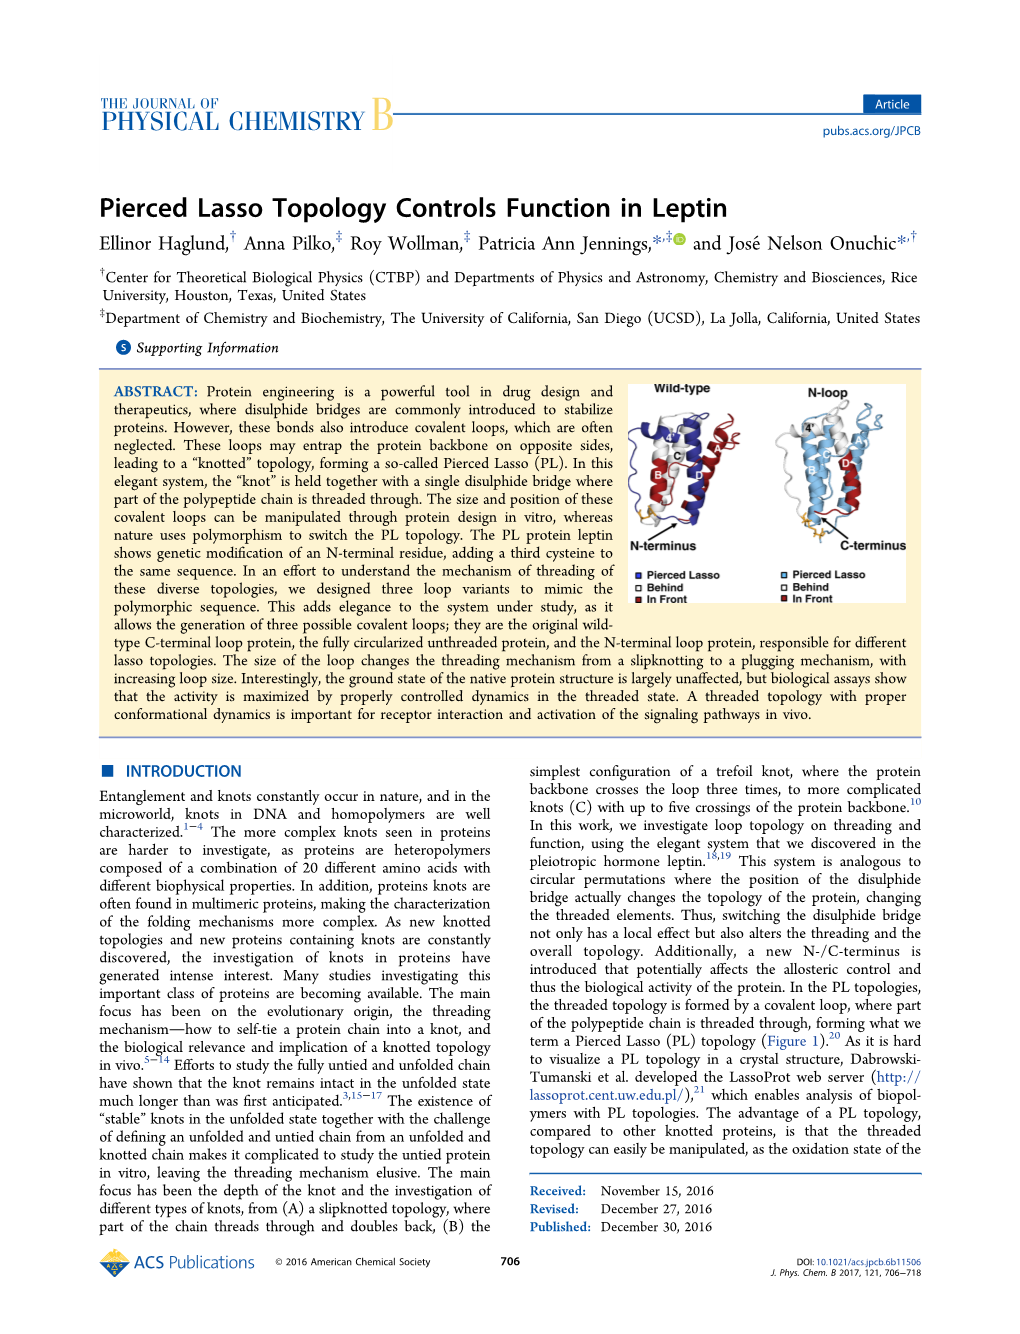 Pierced Lasso Topology Controls Function in Leptin